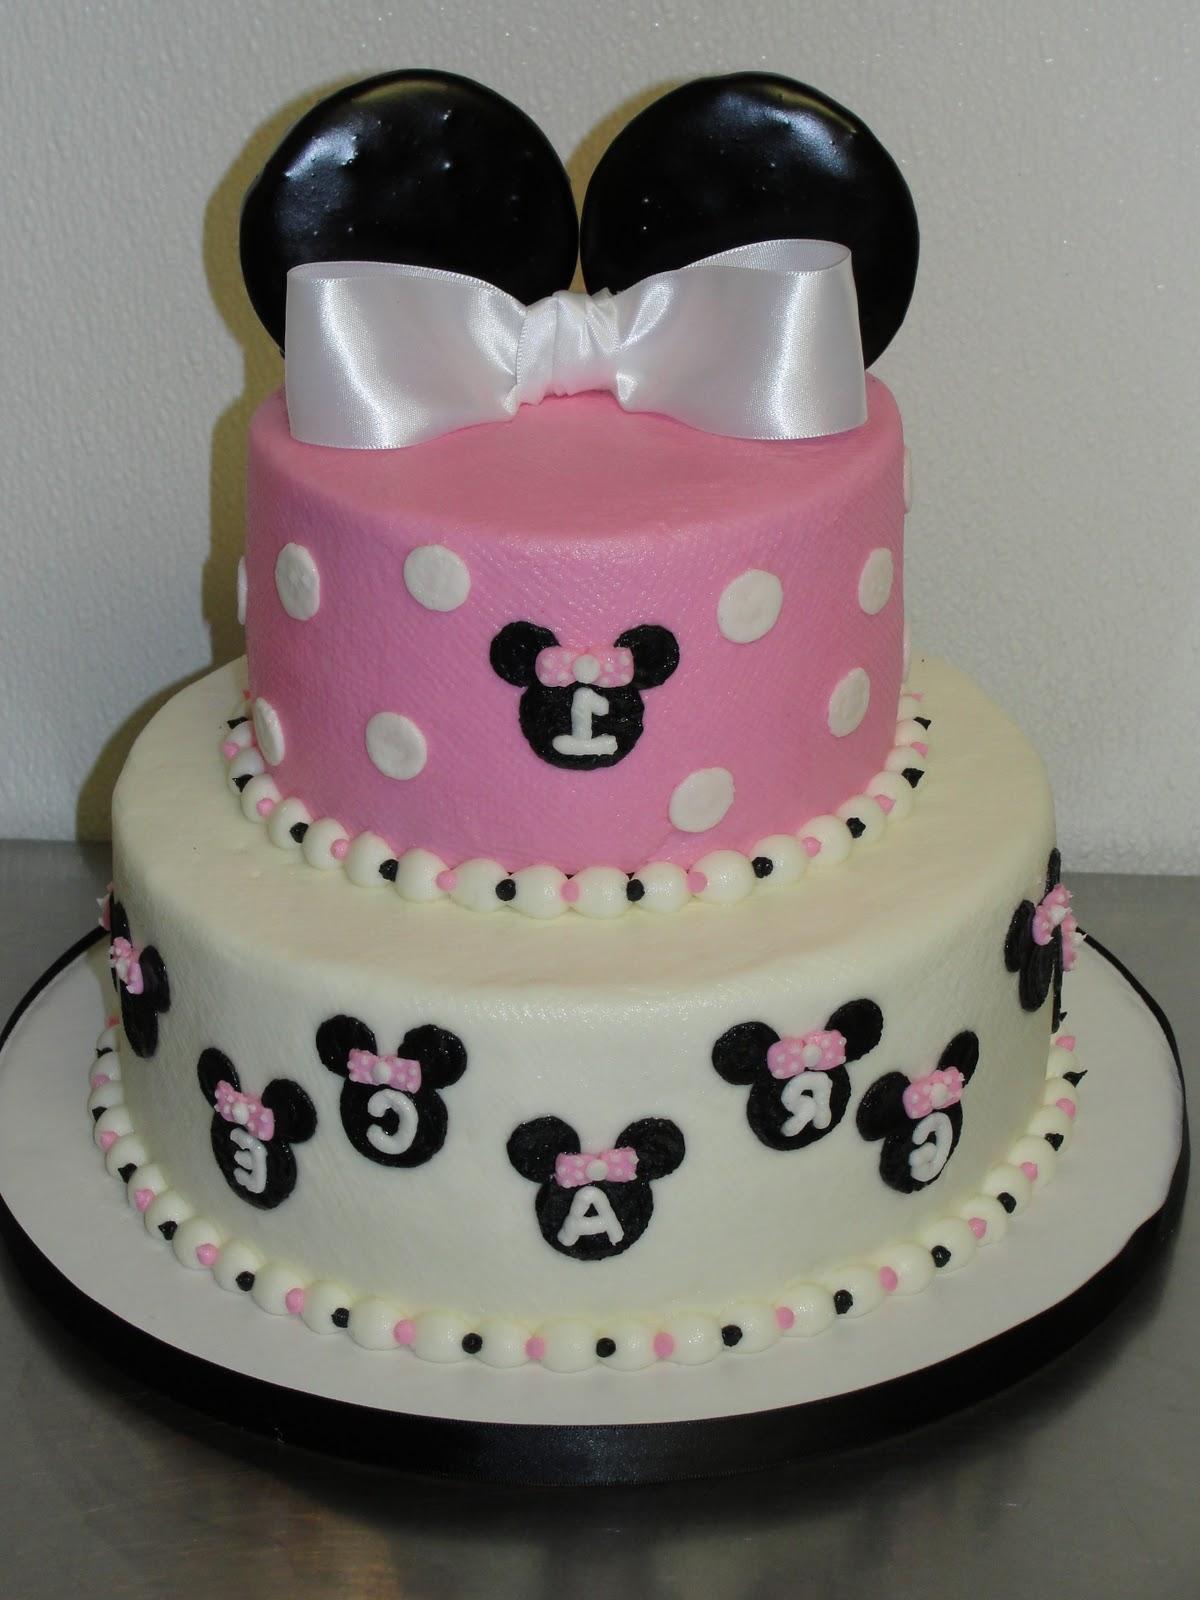 A Minnie Mouse first birthday